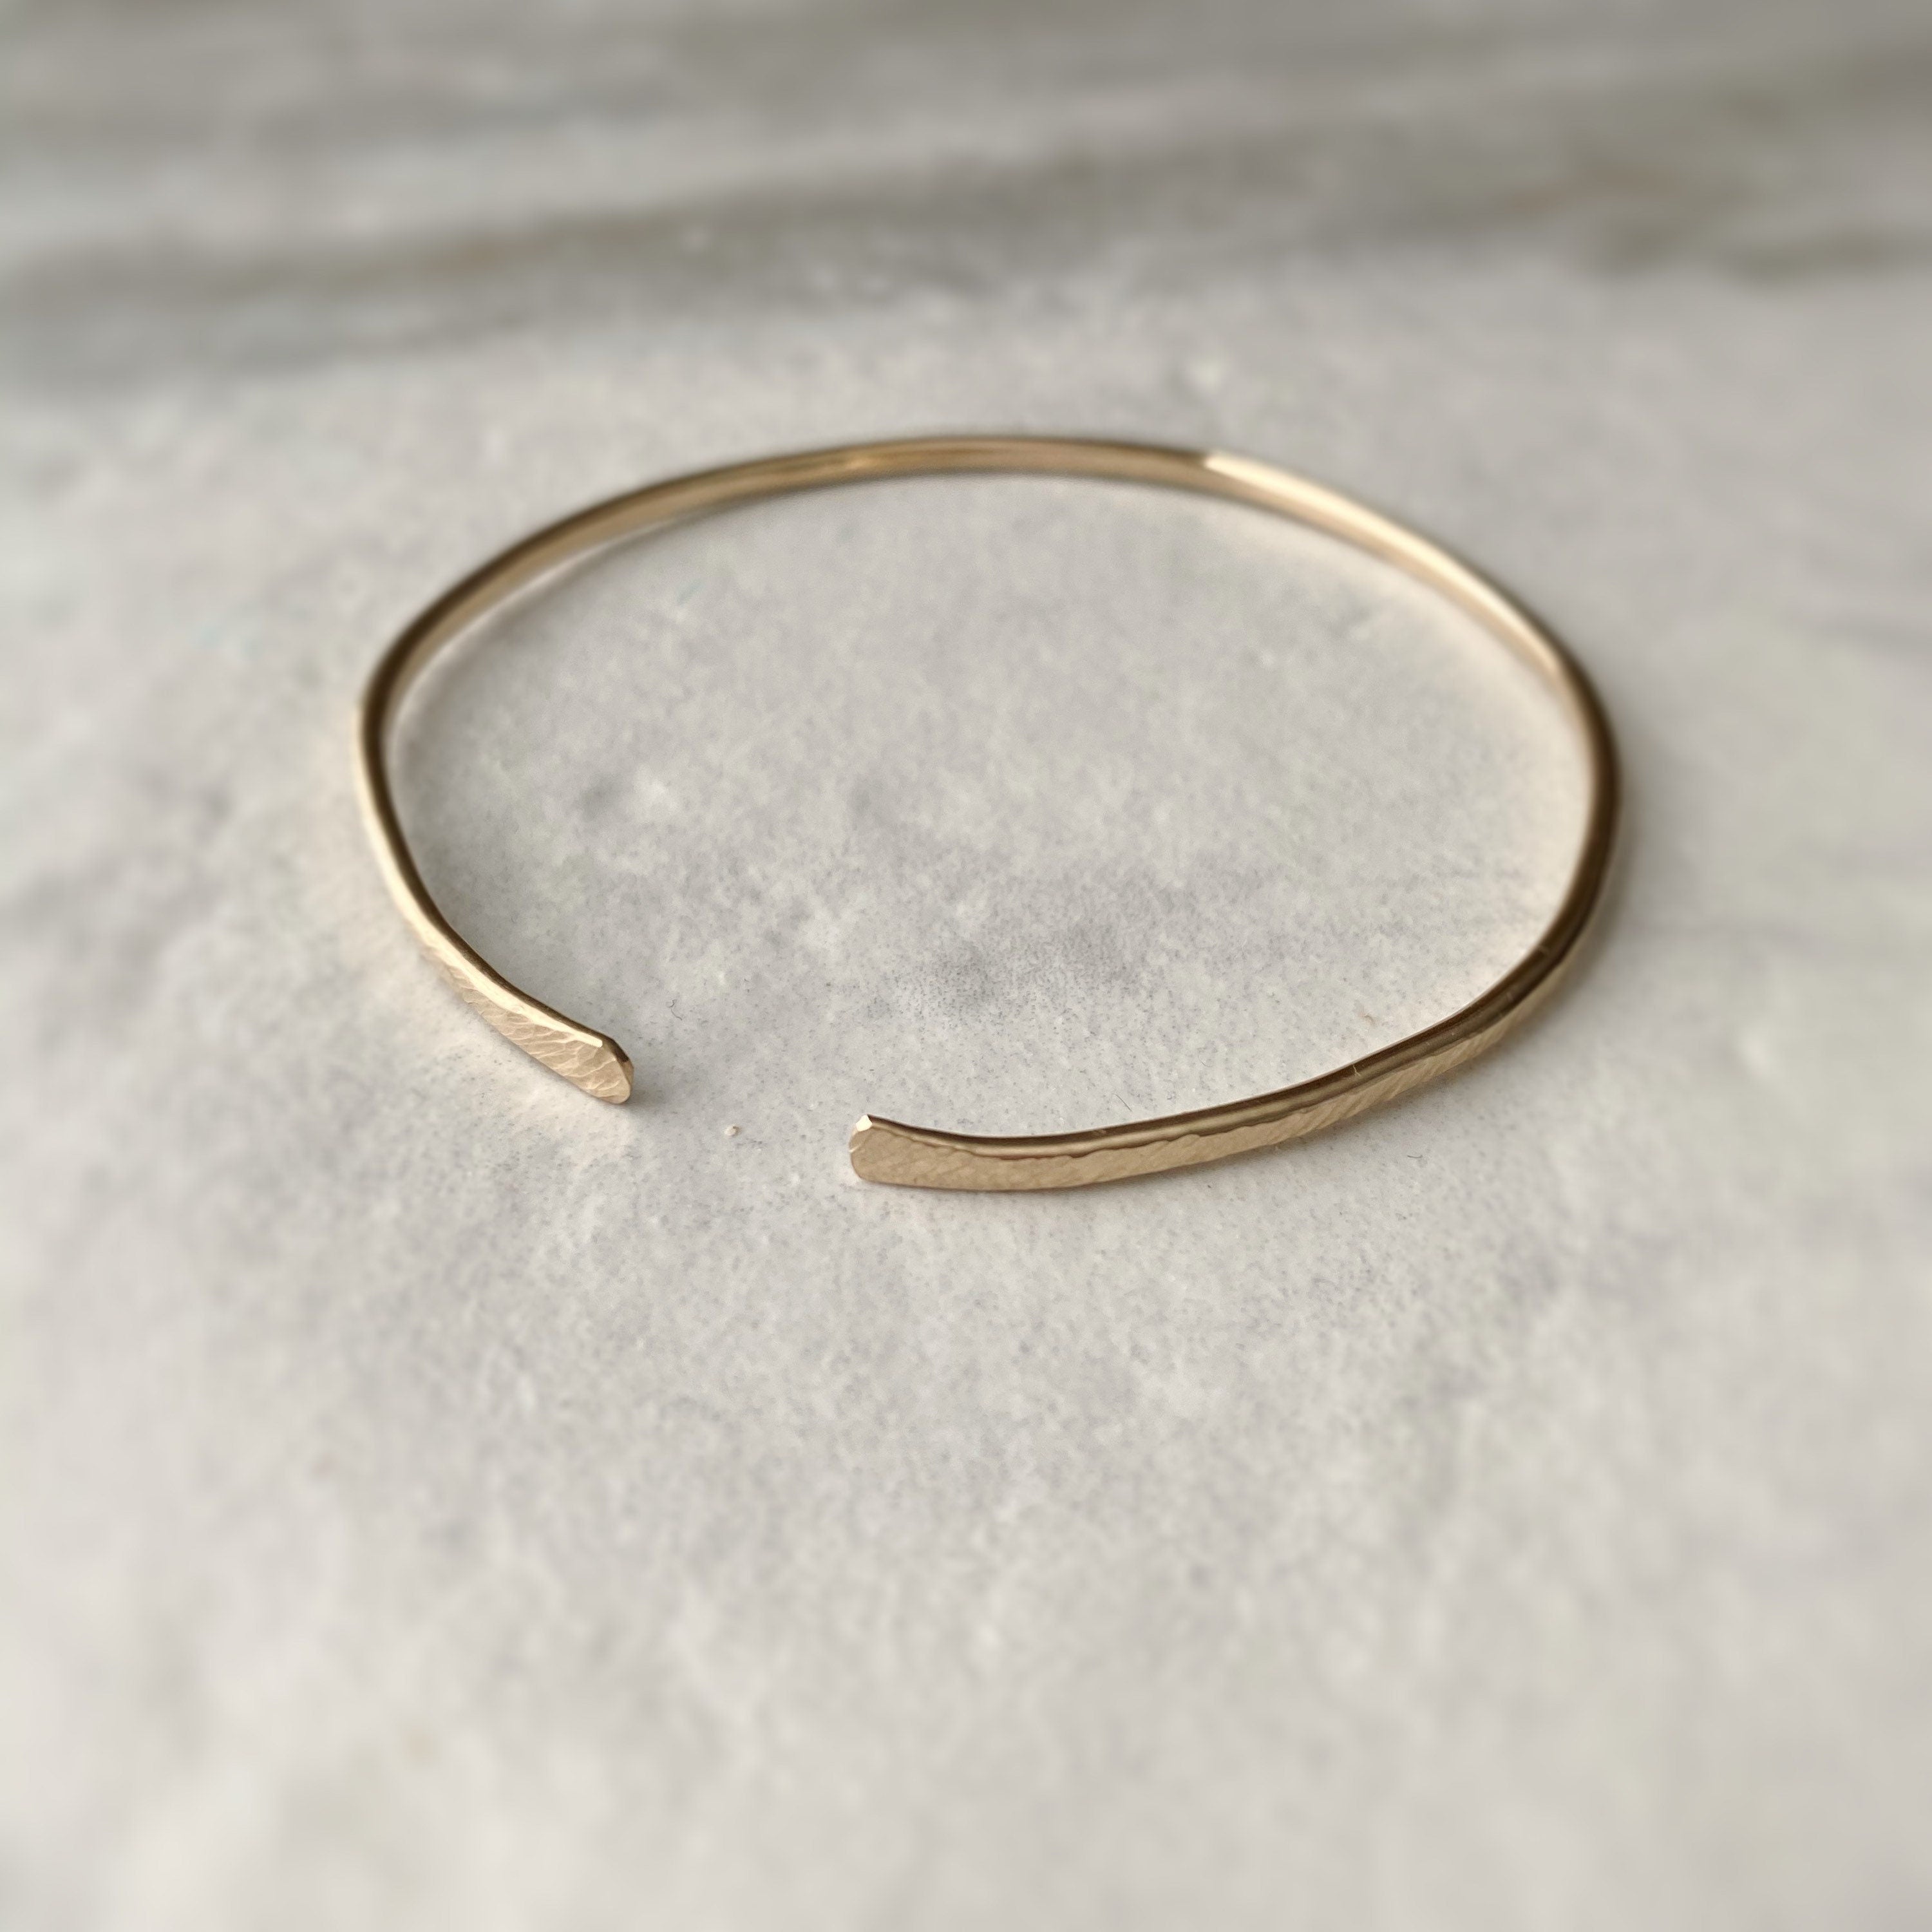 Simple Hammered Gold Bangle| Textured Gold Bangle| Adjustable Bangle | Minimalist Gold Stacking Bangle| Bridal Jewelry| Gift for Her|